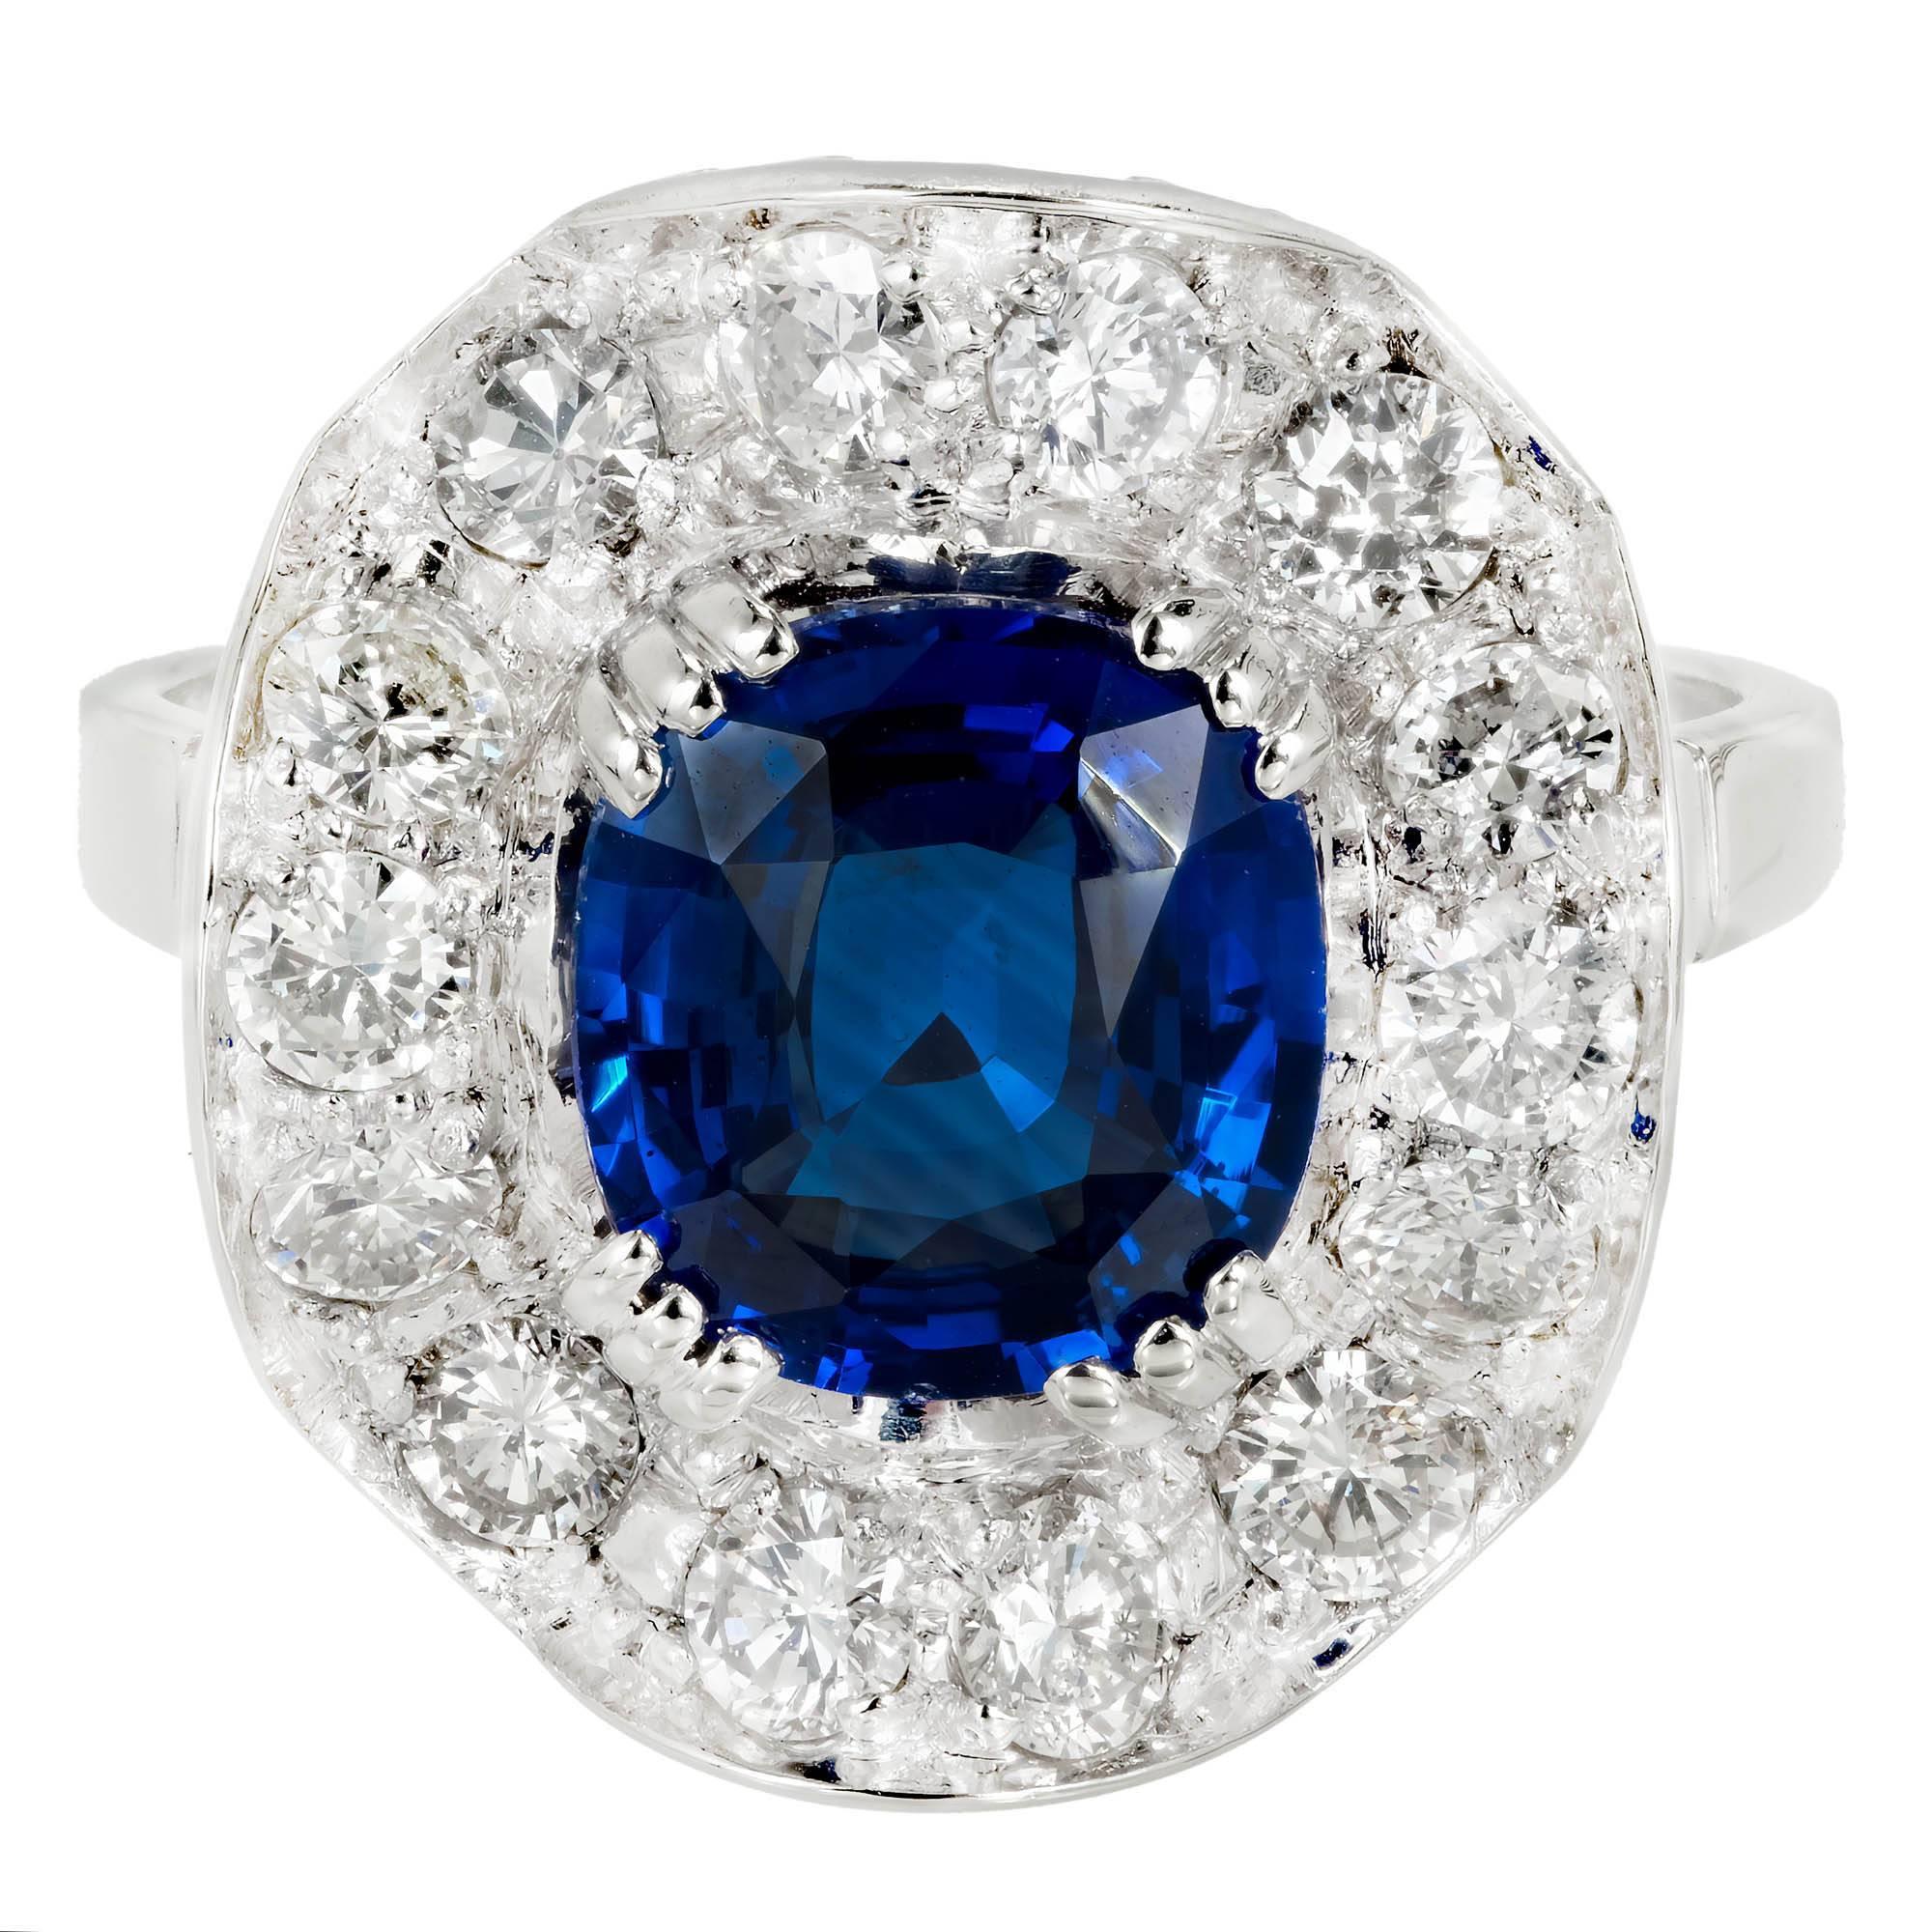 Vintage 1940s sapphire and diamond halo wave design engagement ring. Cushion cut GIA certified center sapphire with a halo of 14 round cut diamonds in a 18k white gold setting. Natural Sapphire, simple heat only. 

18k white gold 
1 cushion blue